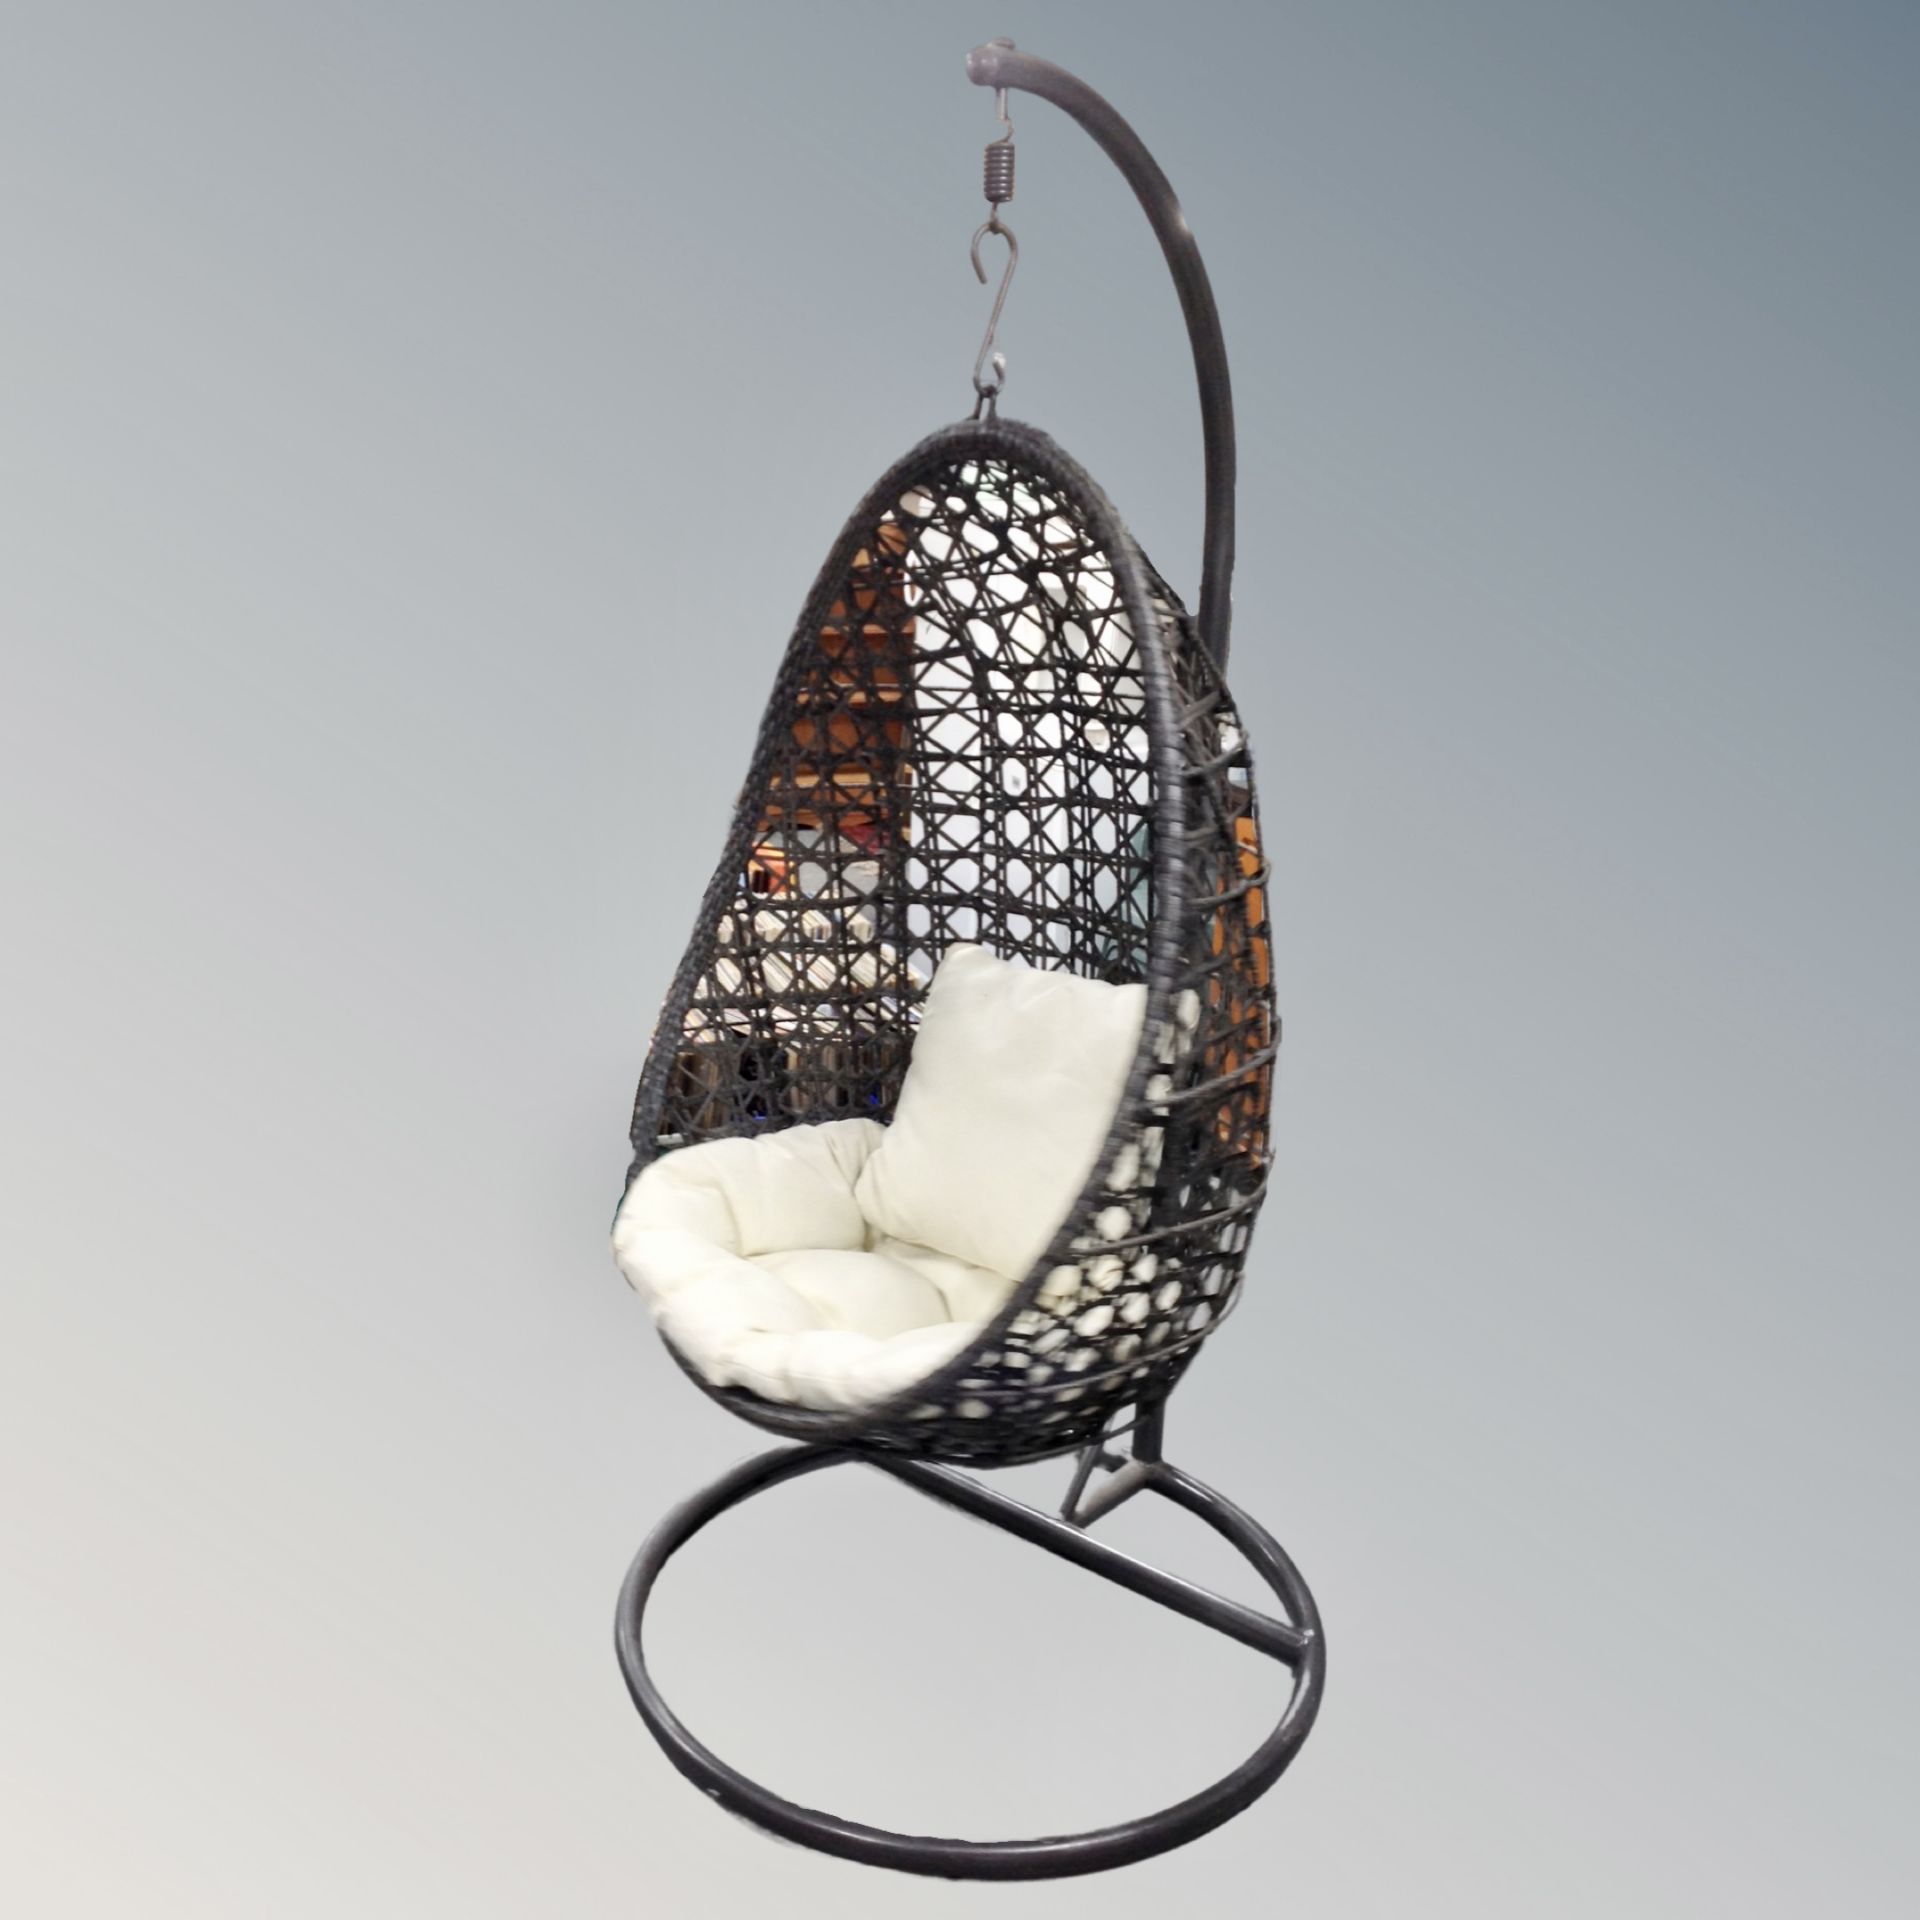 A rattan hanging egg chair with metal frame CONDITION REPORT: This is grey in